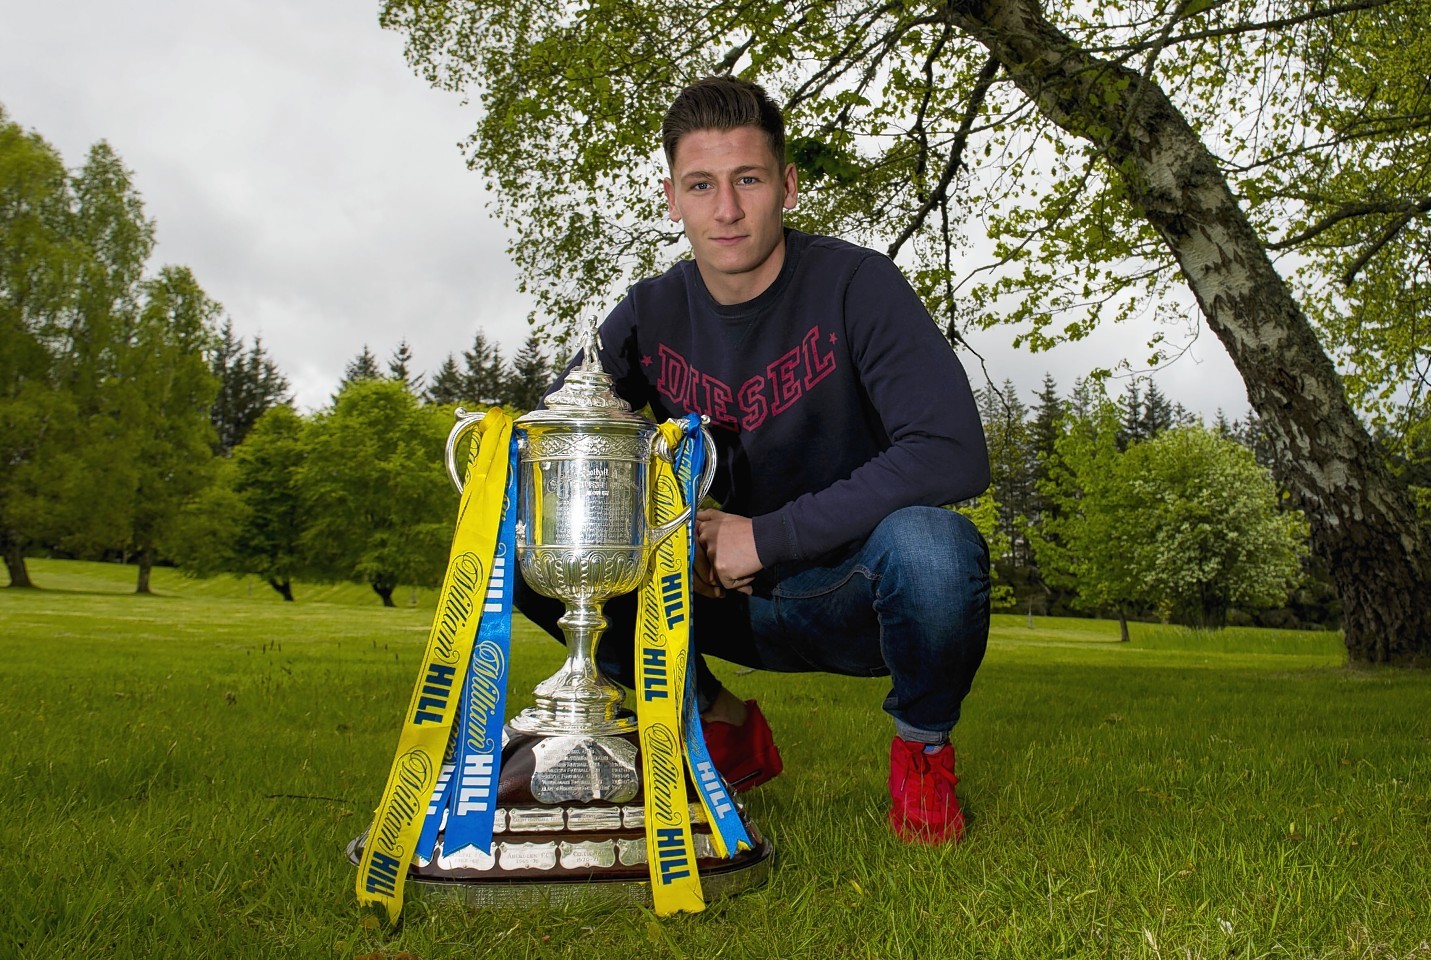 Josh Meekings looks ahead to ICT's clash with Falkirk in the William Hill Scottish Cup final.